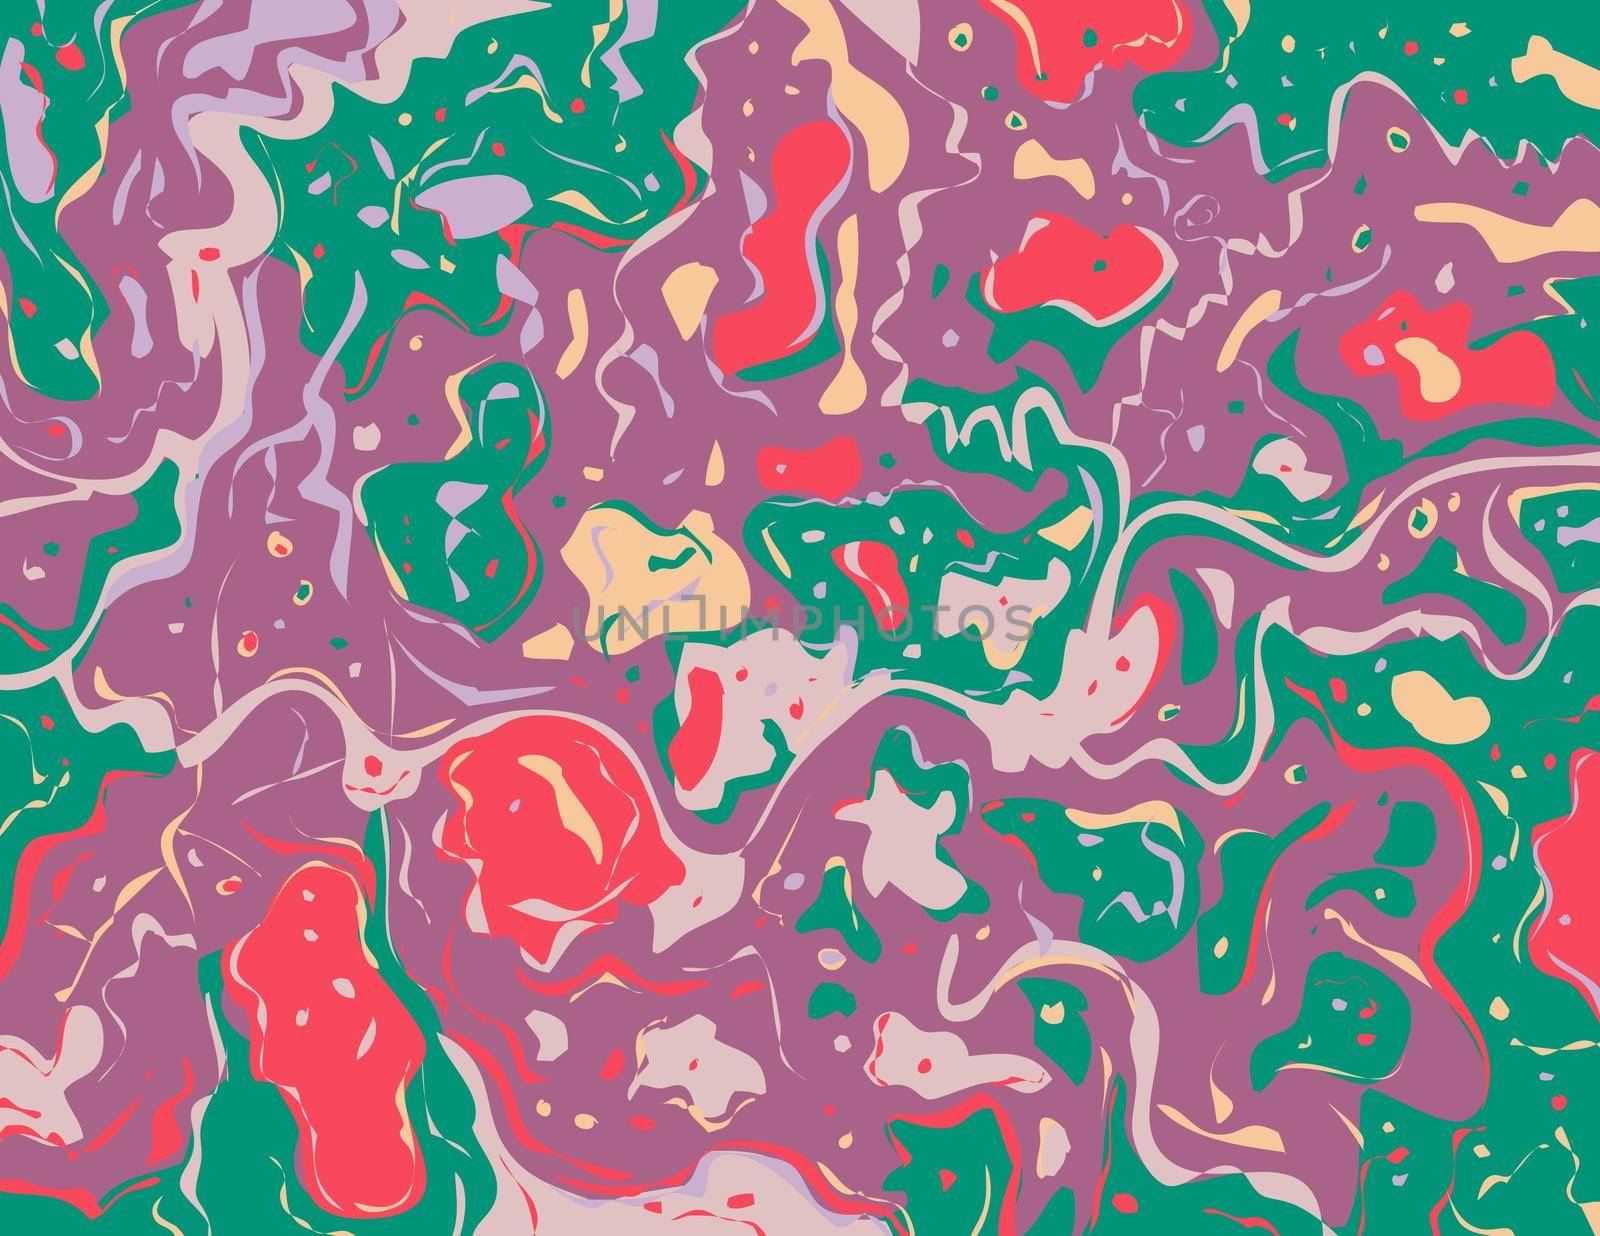 Digital marbling or inkscape illustration of an abstract swirling,psychedelic, liquid marble and simulated marbling in the style of Suminagashi Kintsugi marbled effect in color
